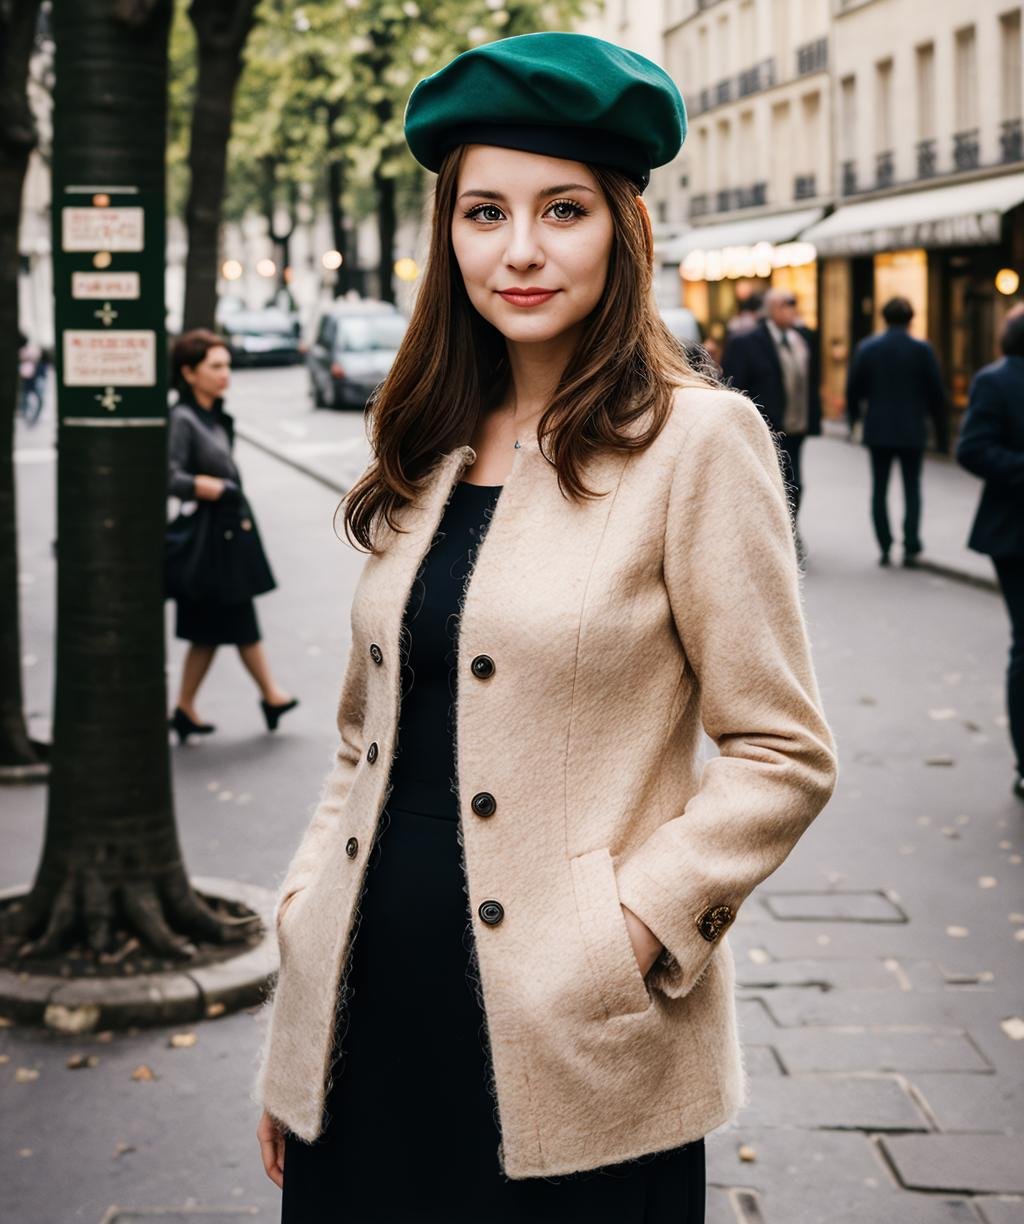 professional portrait photo of a woman in a beret and mohair jacket on the streets of paris, bokeh